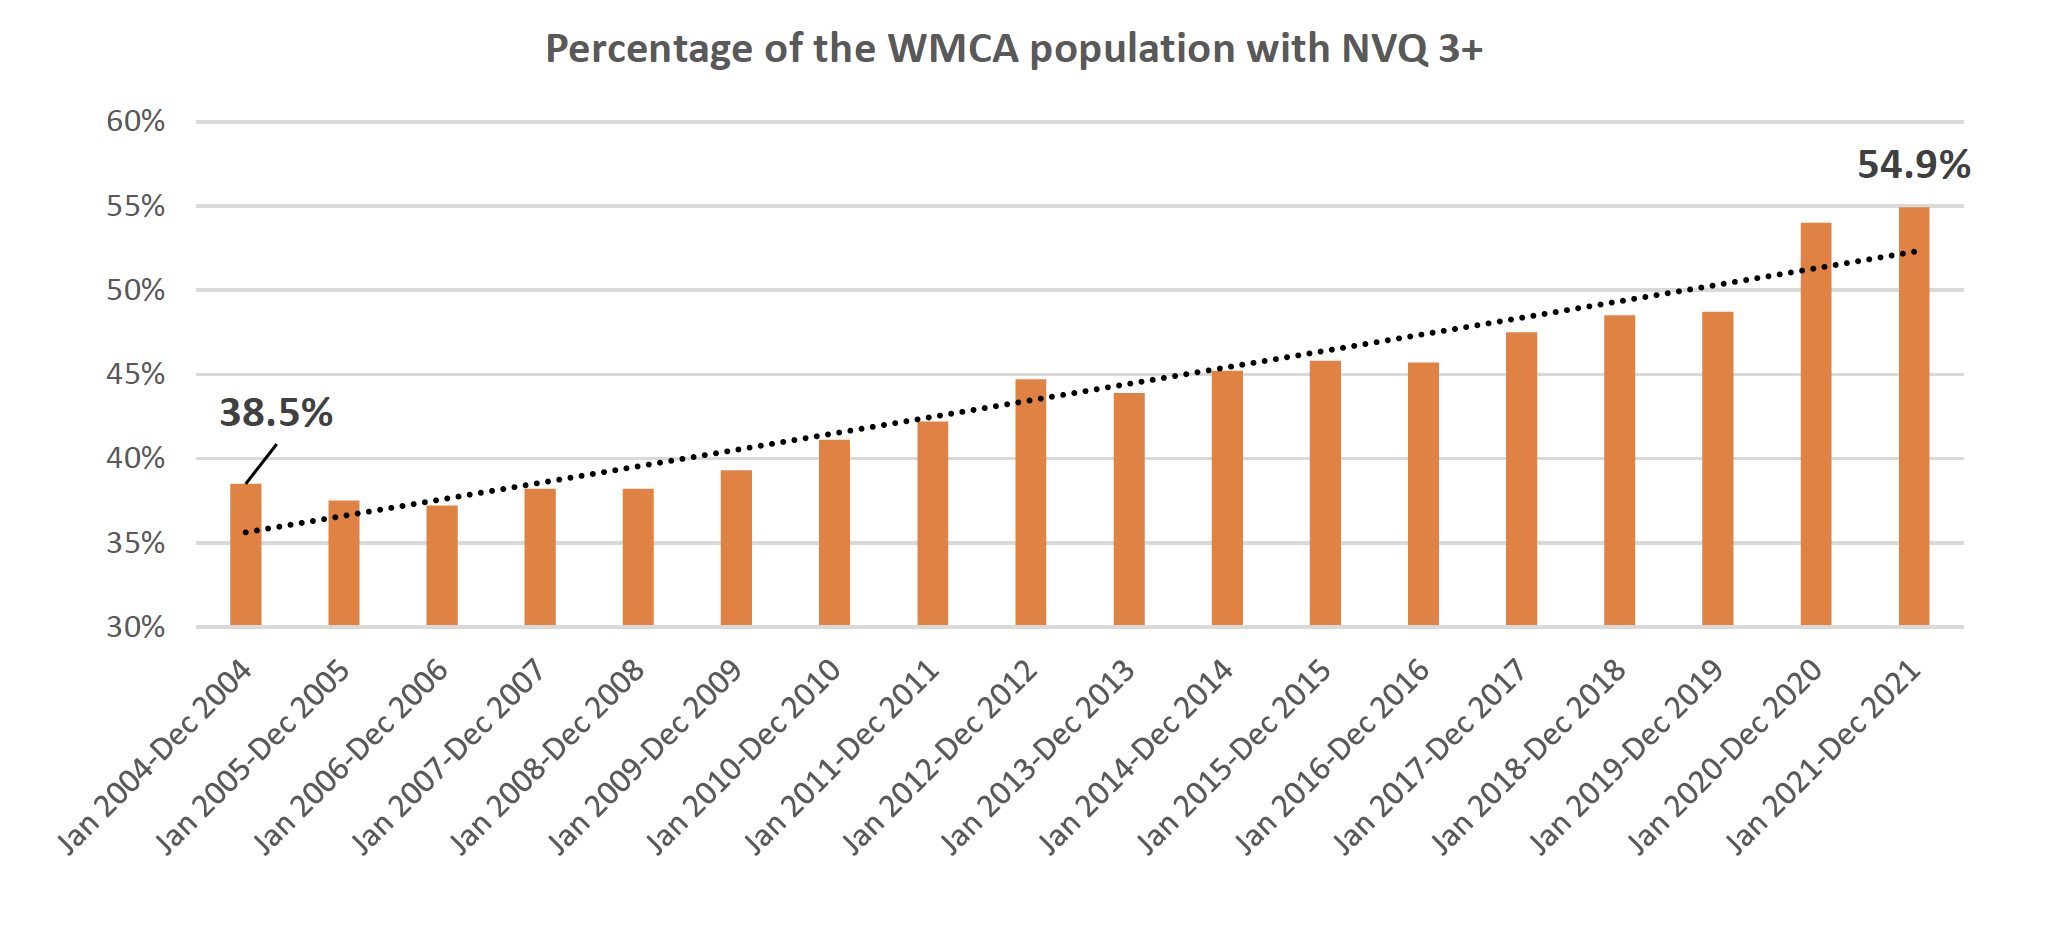 A graph showing the percentage of the WMCA population with NVQ 3+ qualifications, ranging from January 2004 to January 2021.